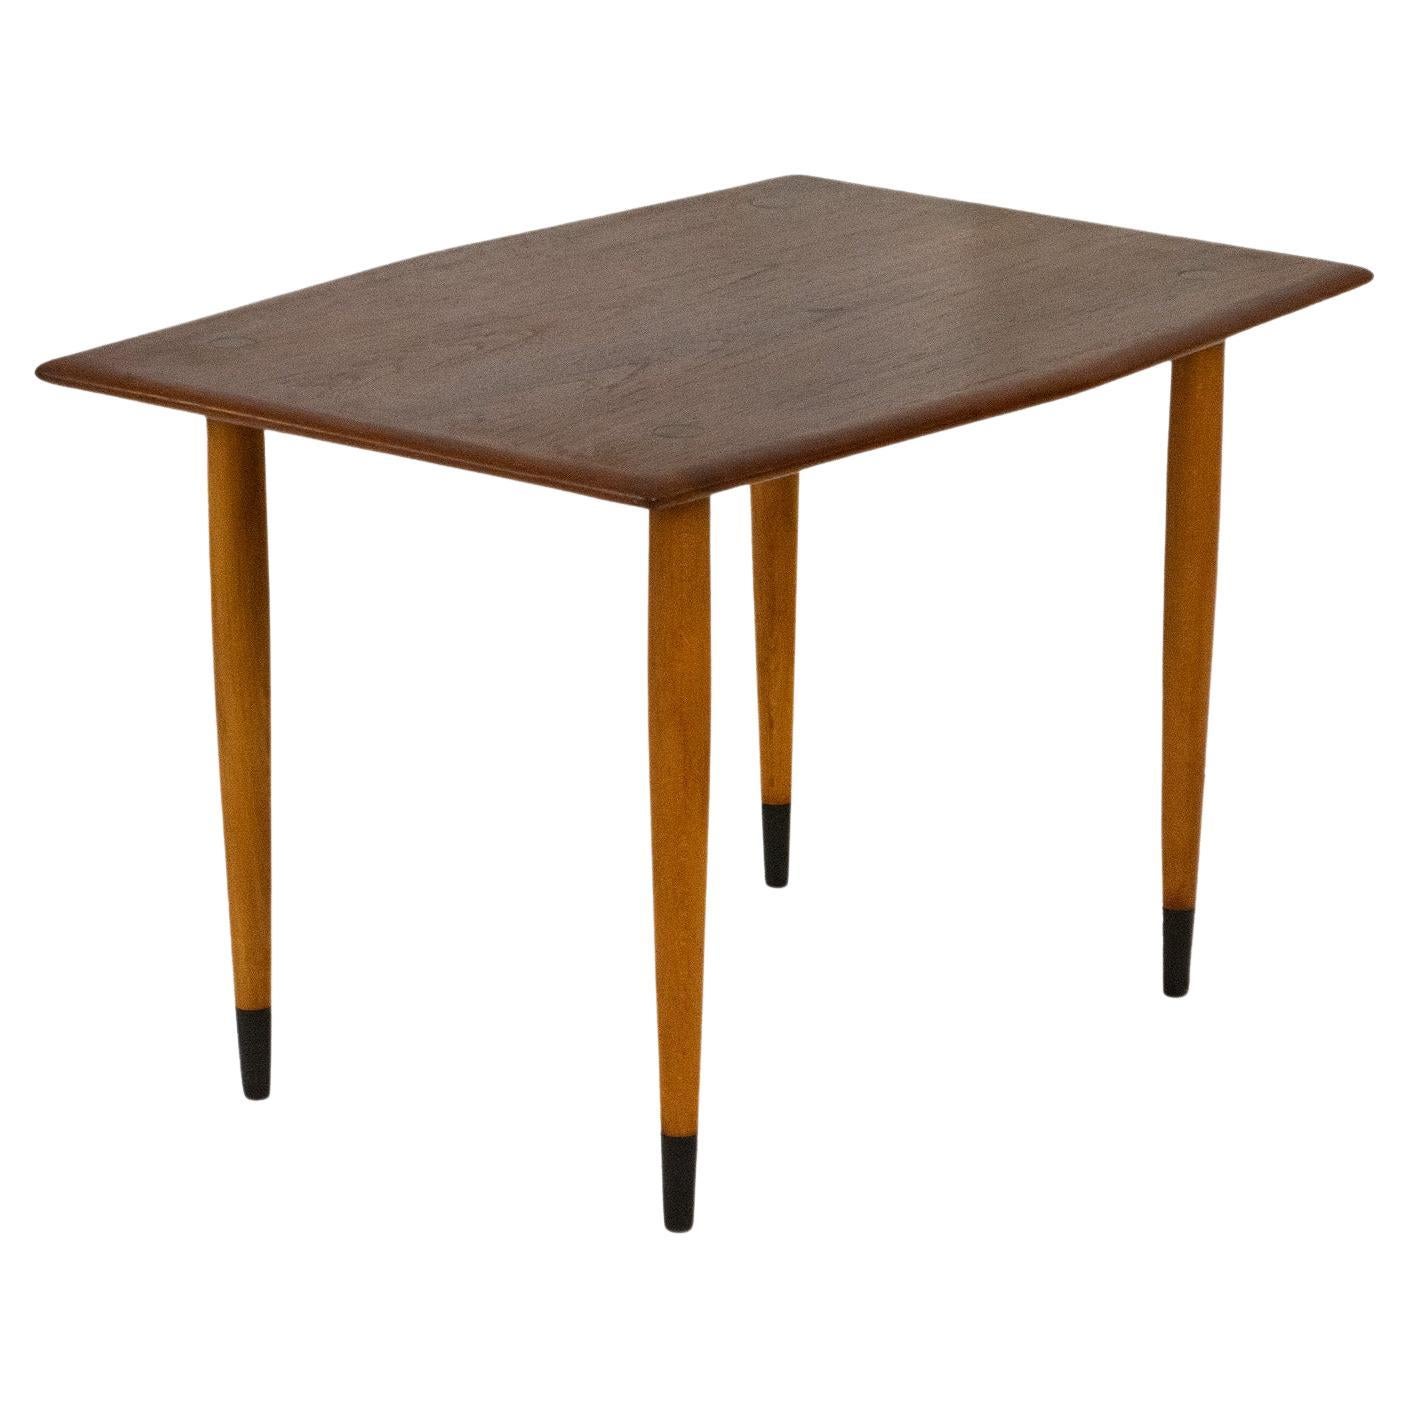 Everything about this pair of Modern Teak and Brass side tables by Dux of Sweden is subtle, delicate, and stylish. The table top has a beautiful teak wood grain and is designed in a unique hexagon shape with soft curving edges. It features lovely